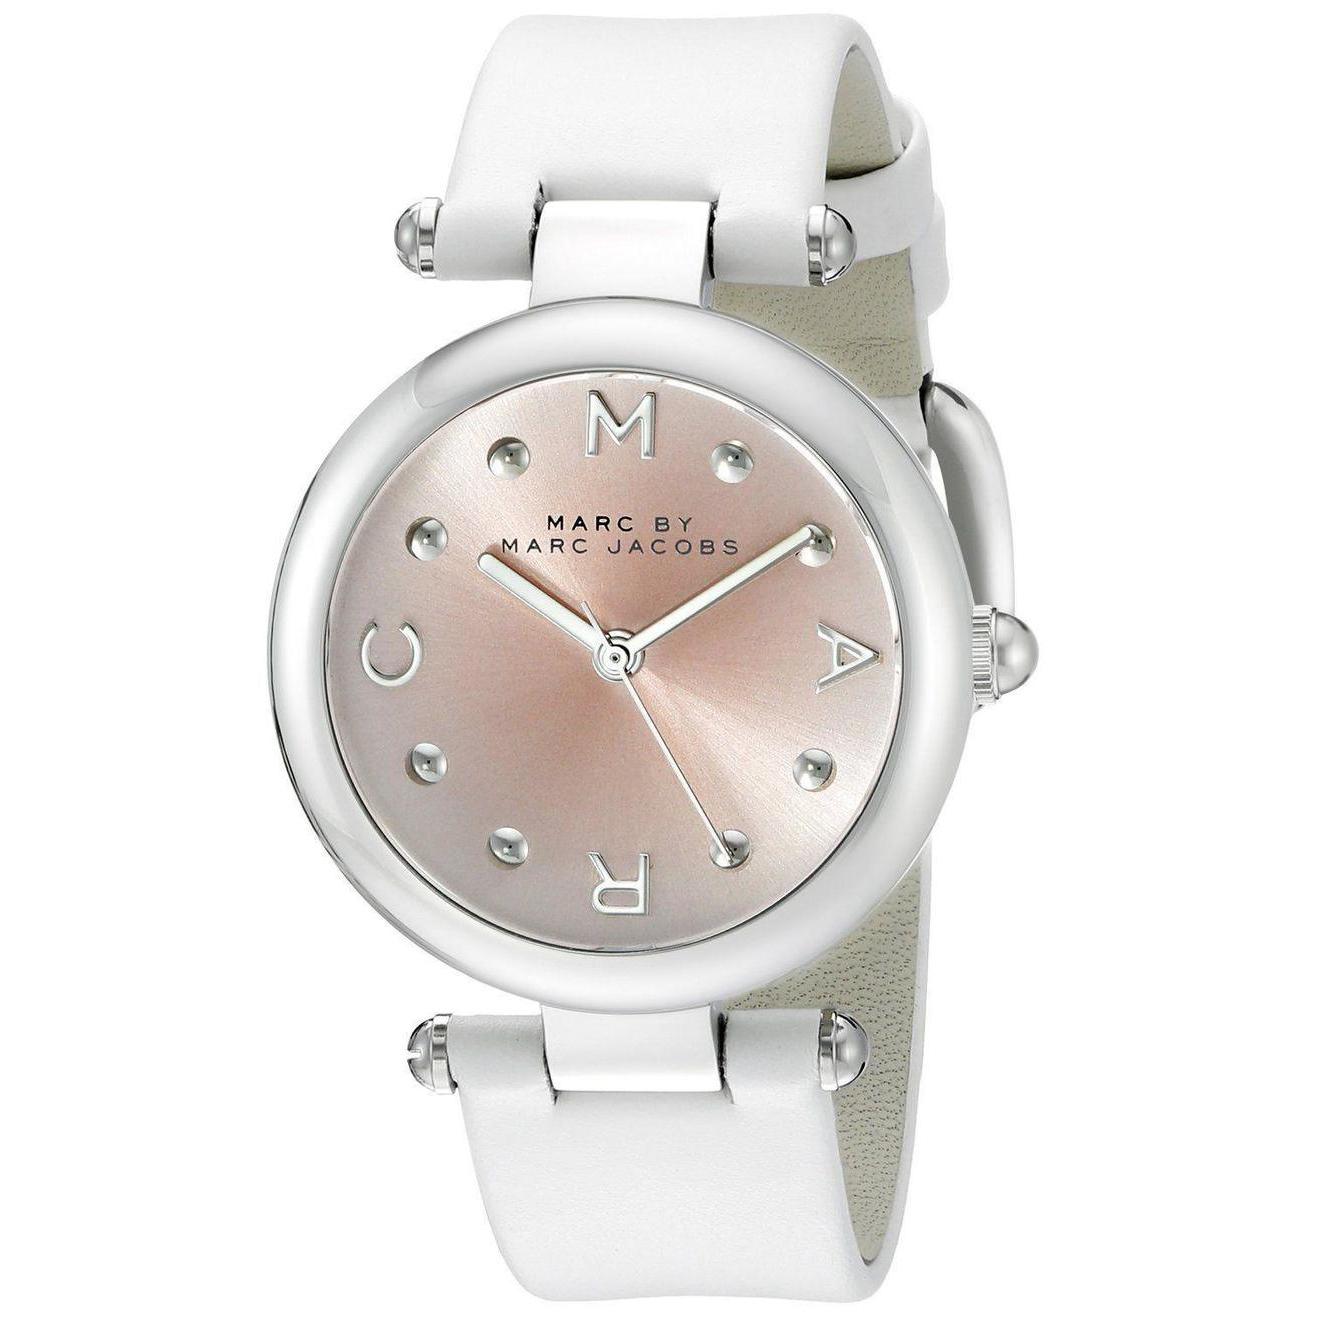 If you are looking Marc by Marc Jacobs Dotty Pink-Hue Dial White Leather Strap Women's Watch MJ1407 you can buy to tri-state, It is on sale at the best price